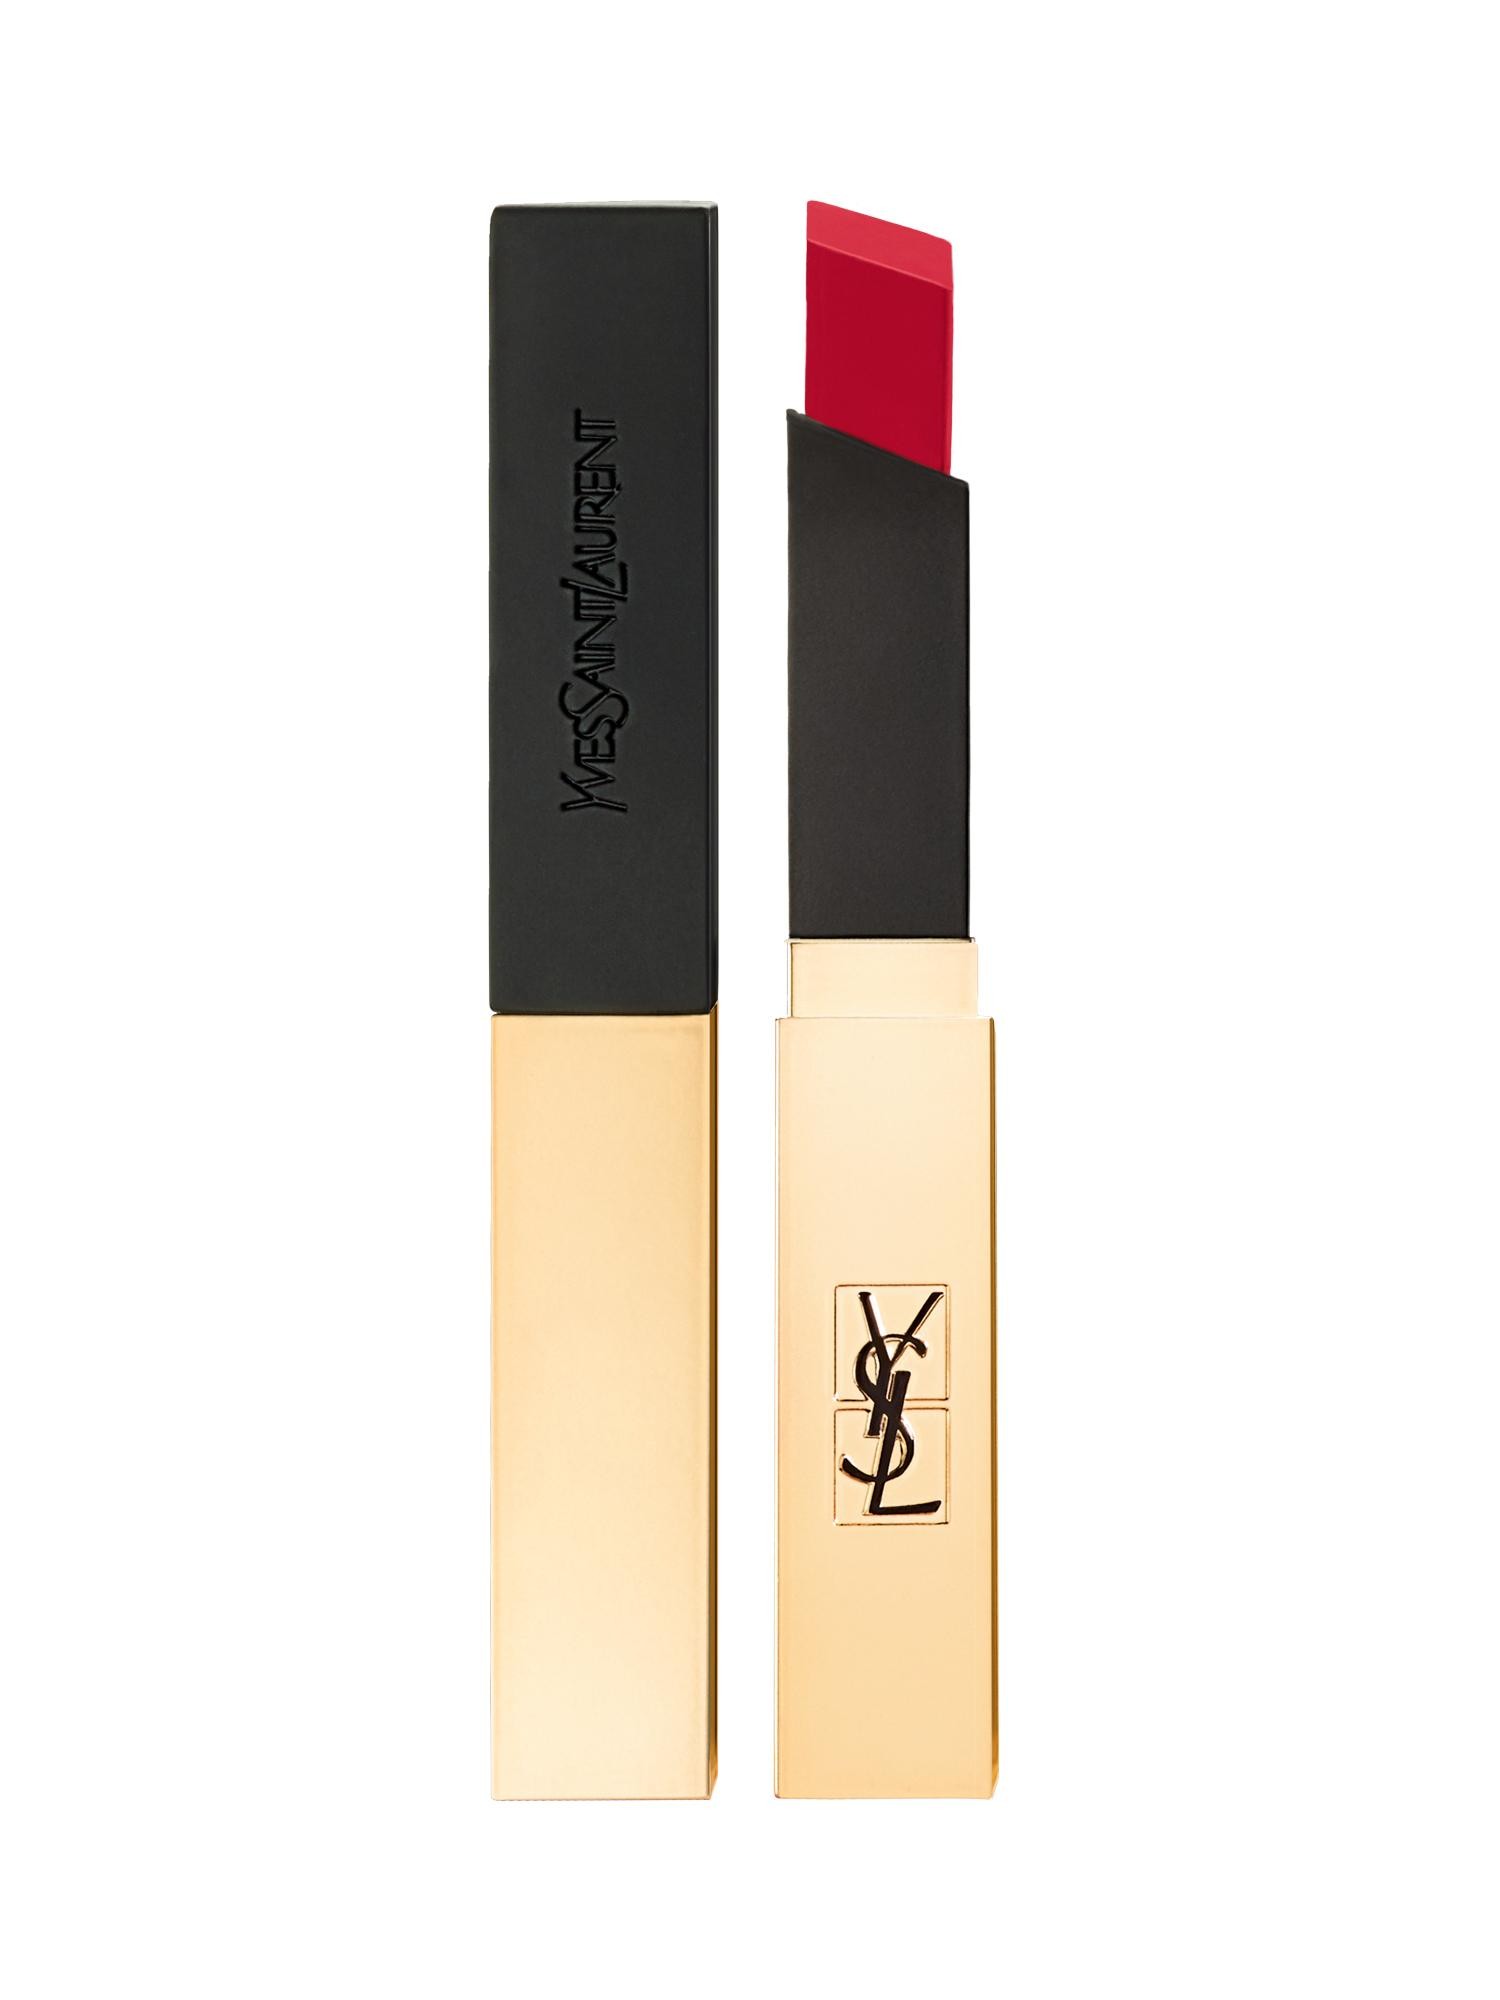 Yves Saint Laurent Rouge Pur Couture The Slim , 21 Rouge Paradoxe, 2.2g